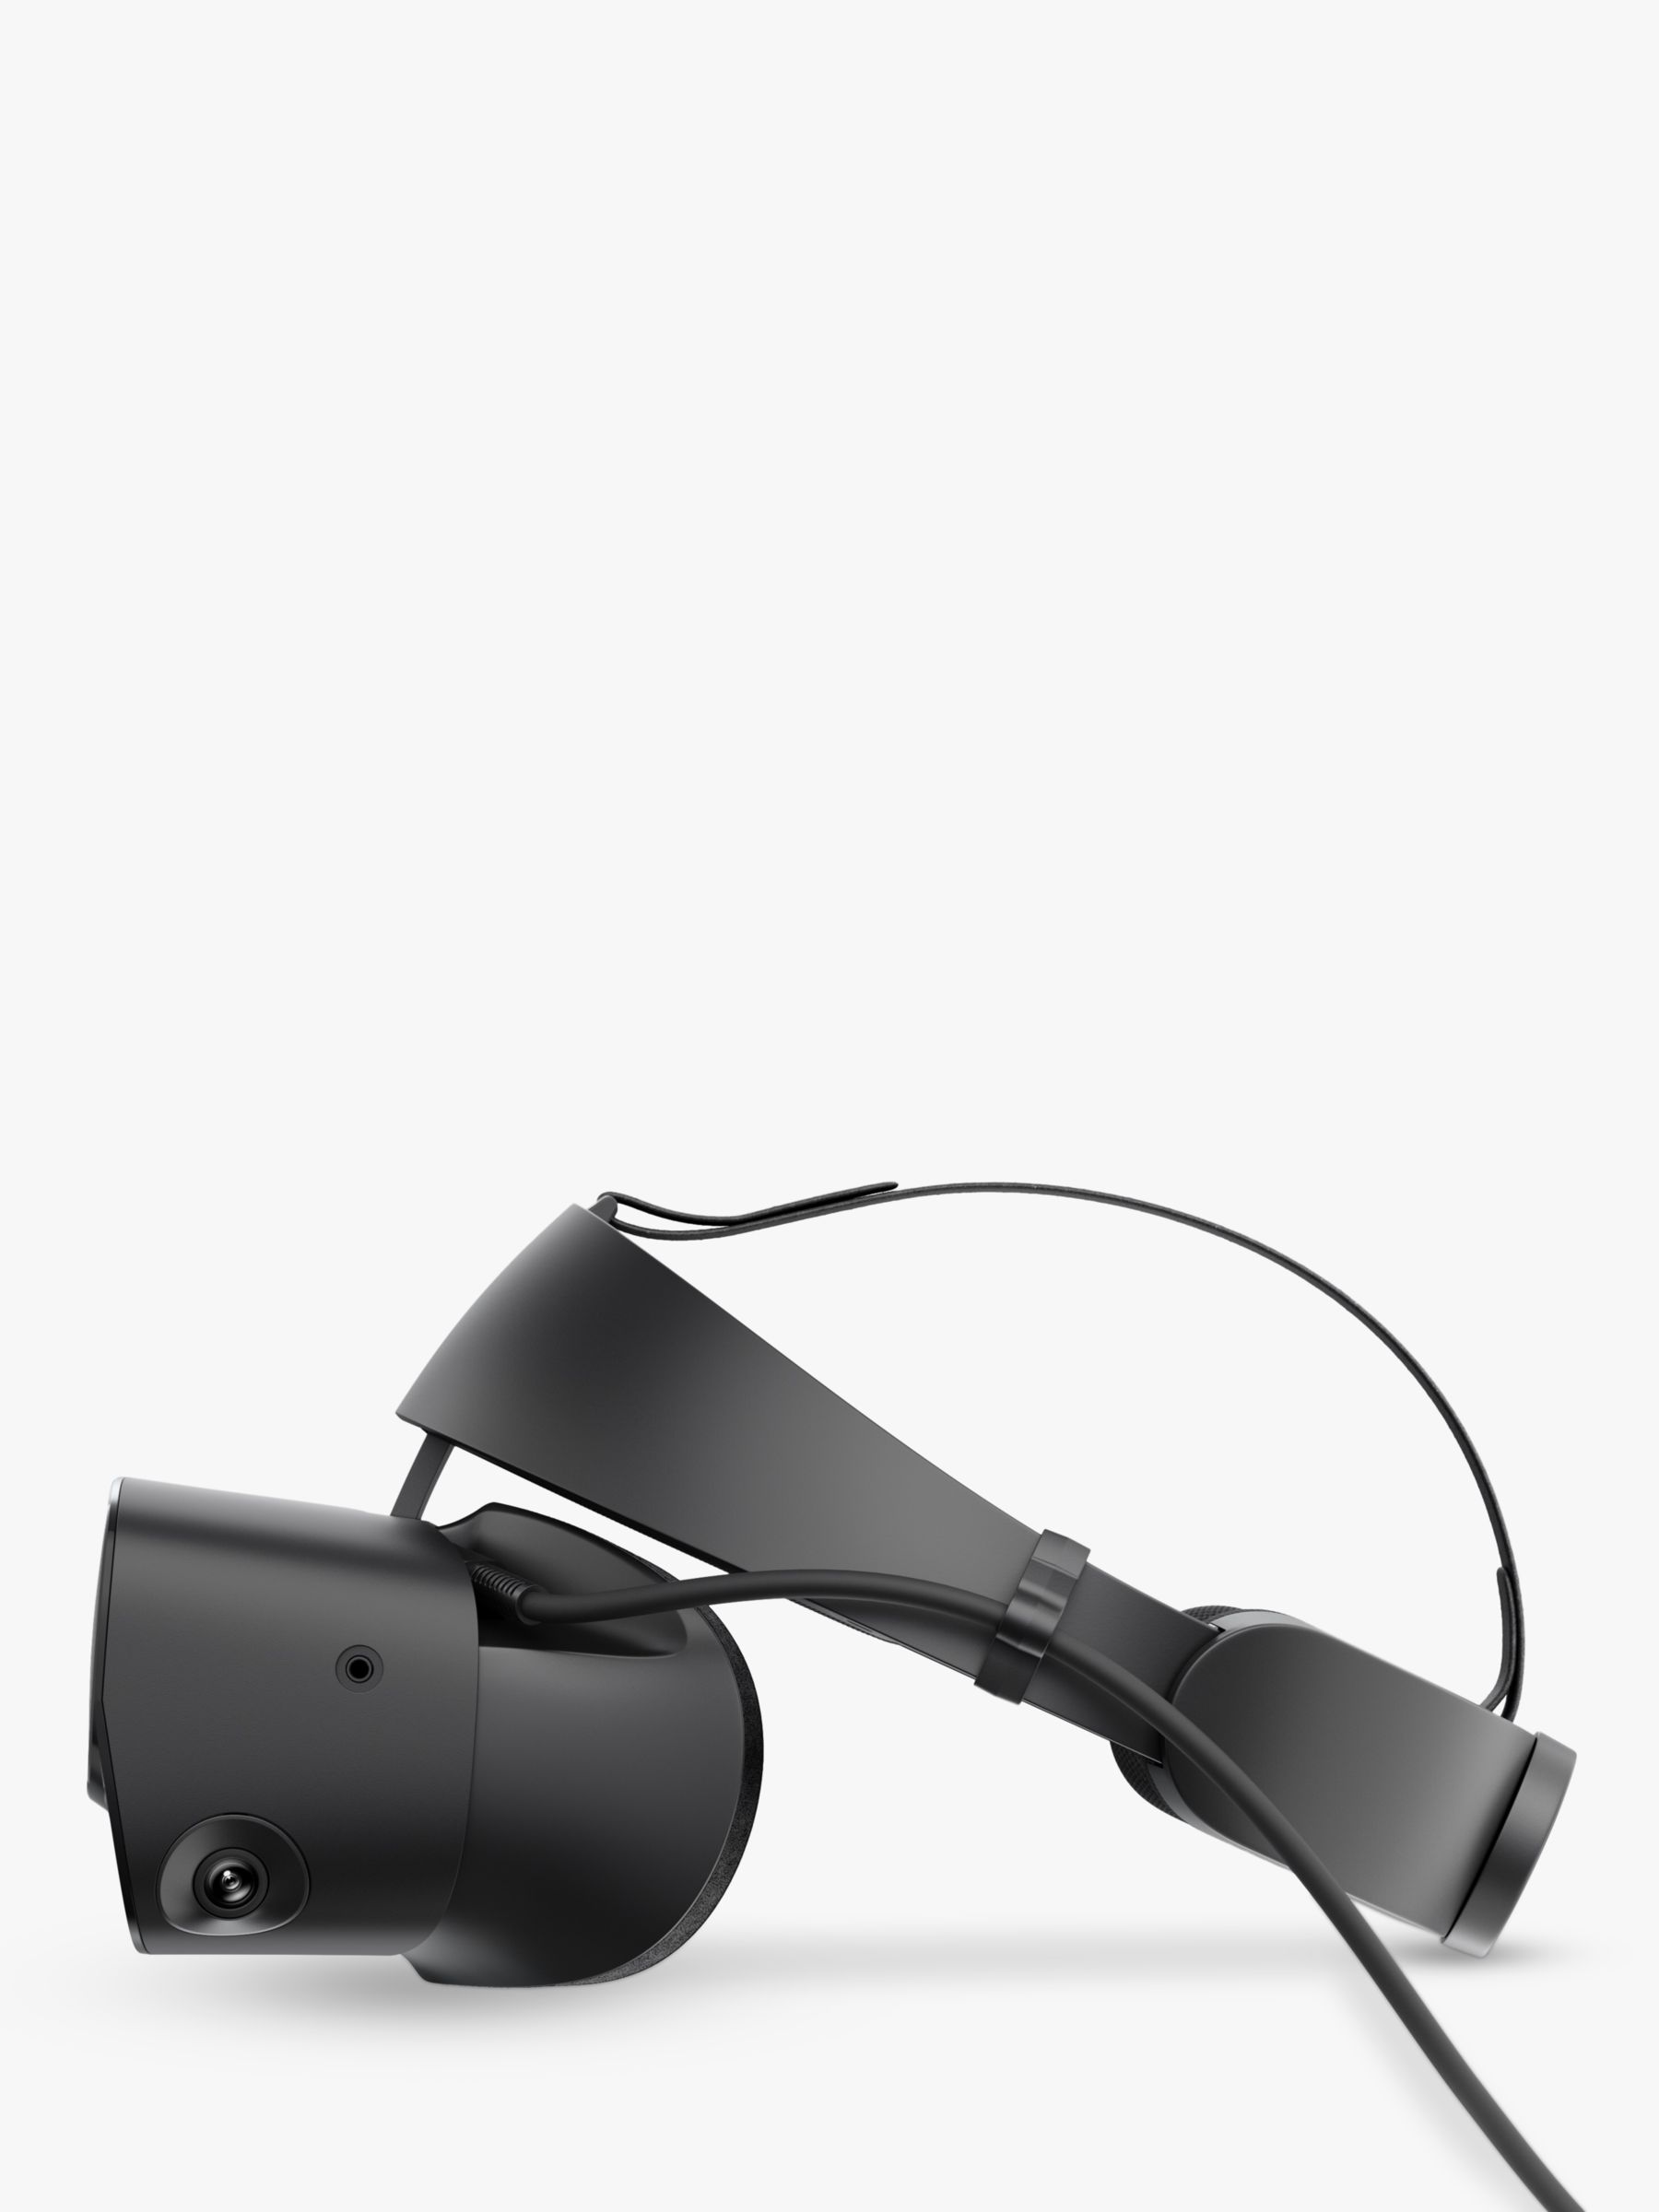 oculus rift s touch controllers